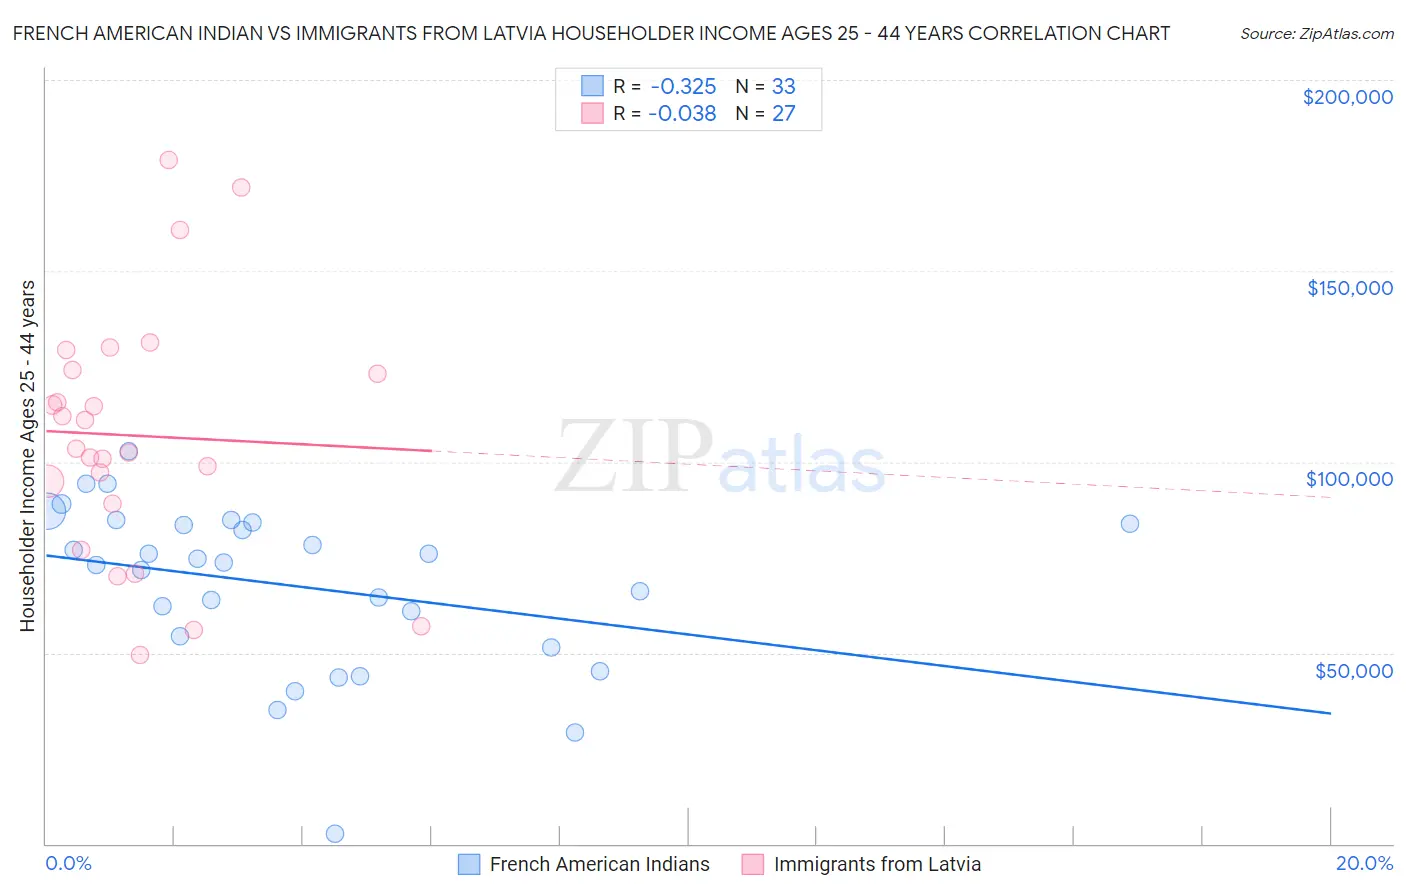 French American Indian vs Immigrants from Latvia Householder Income Ages 25 - 44 years